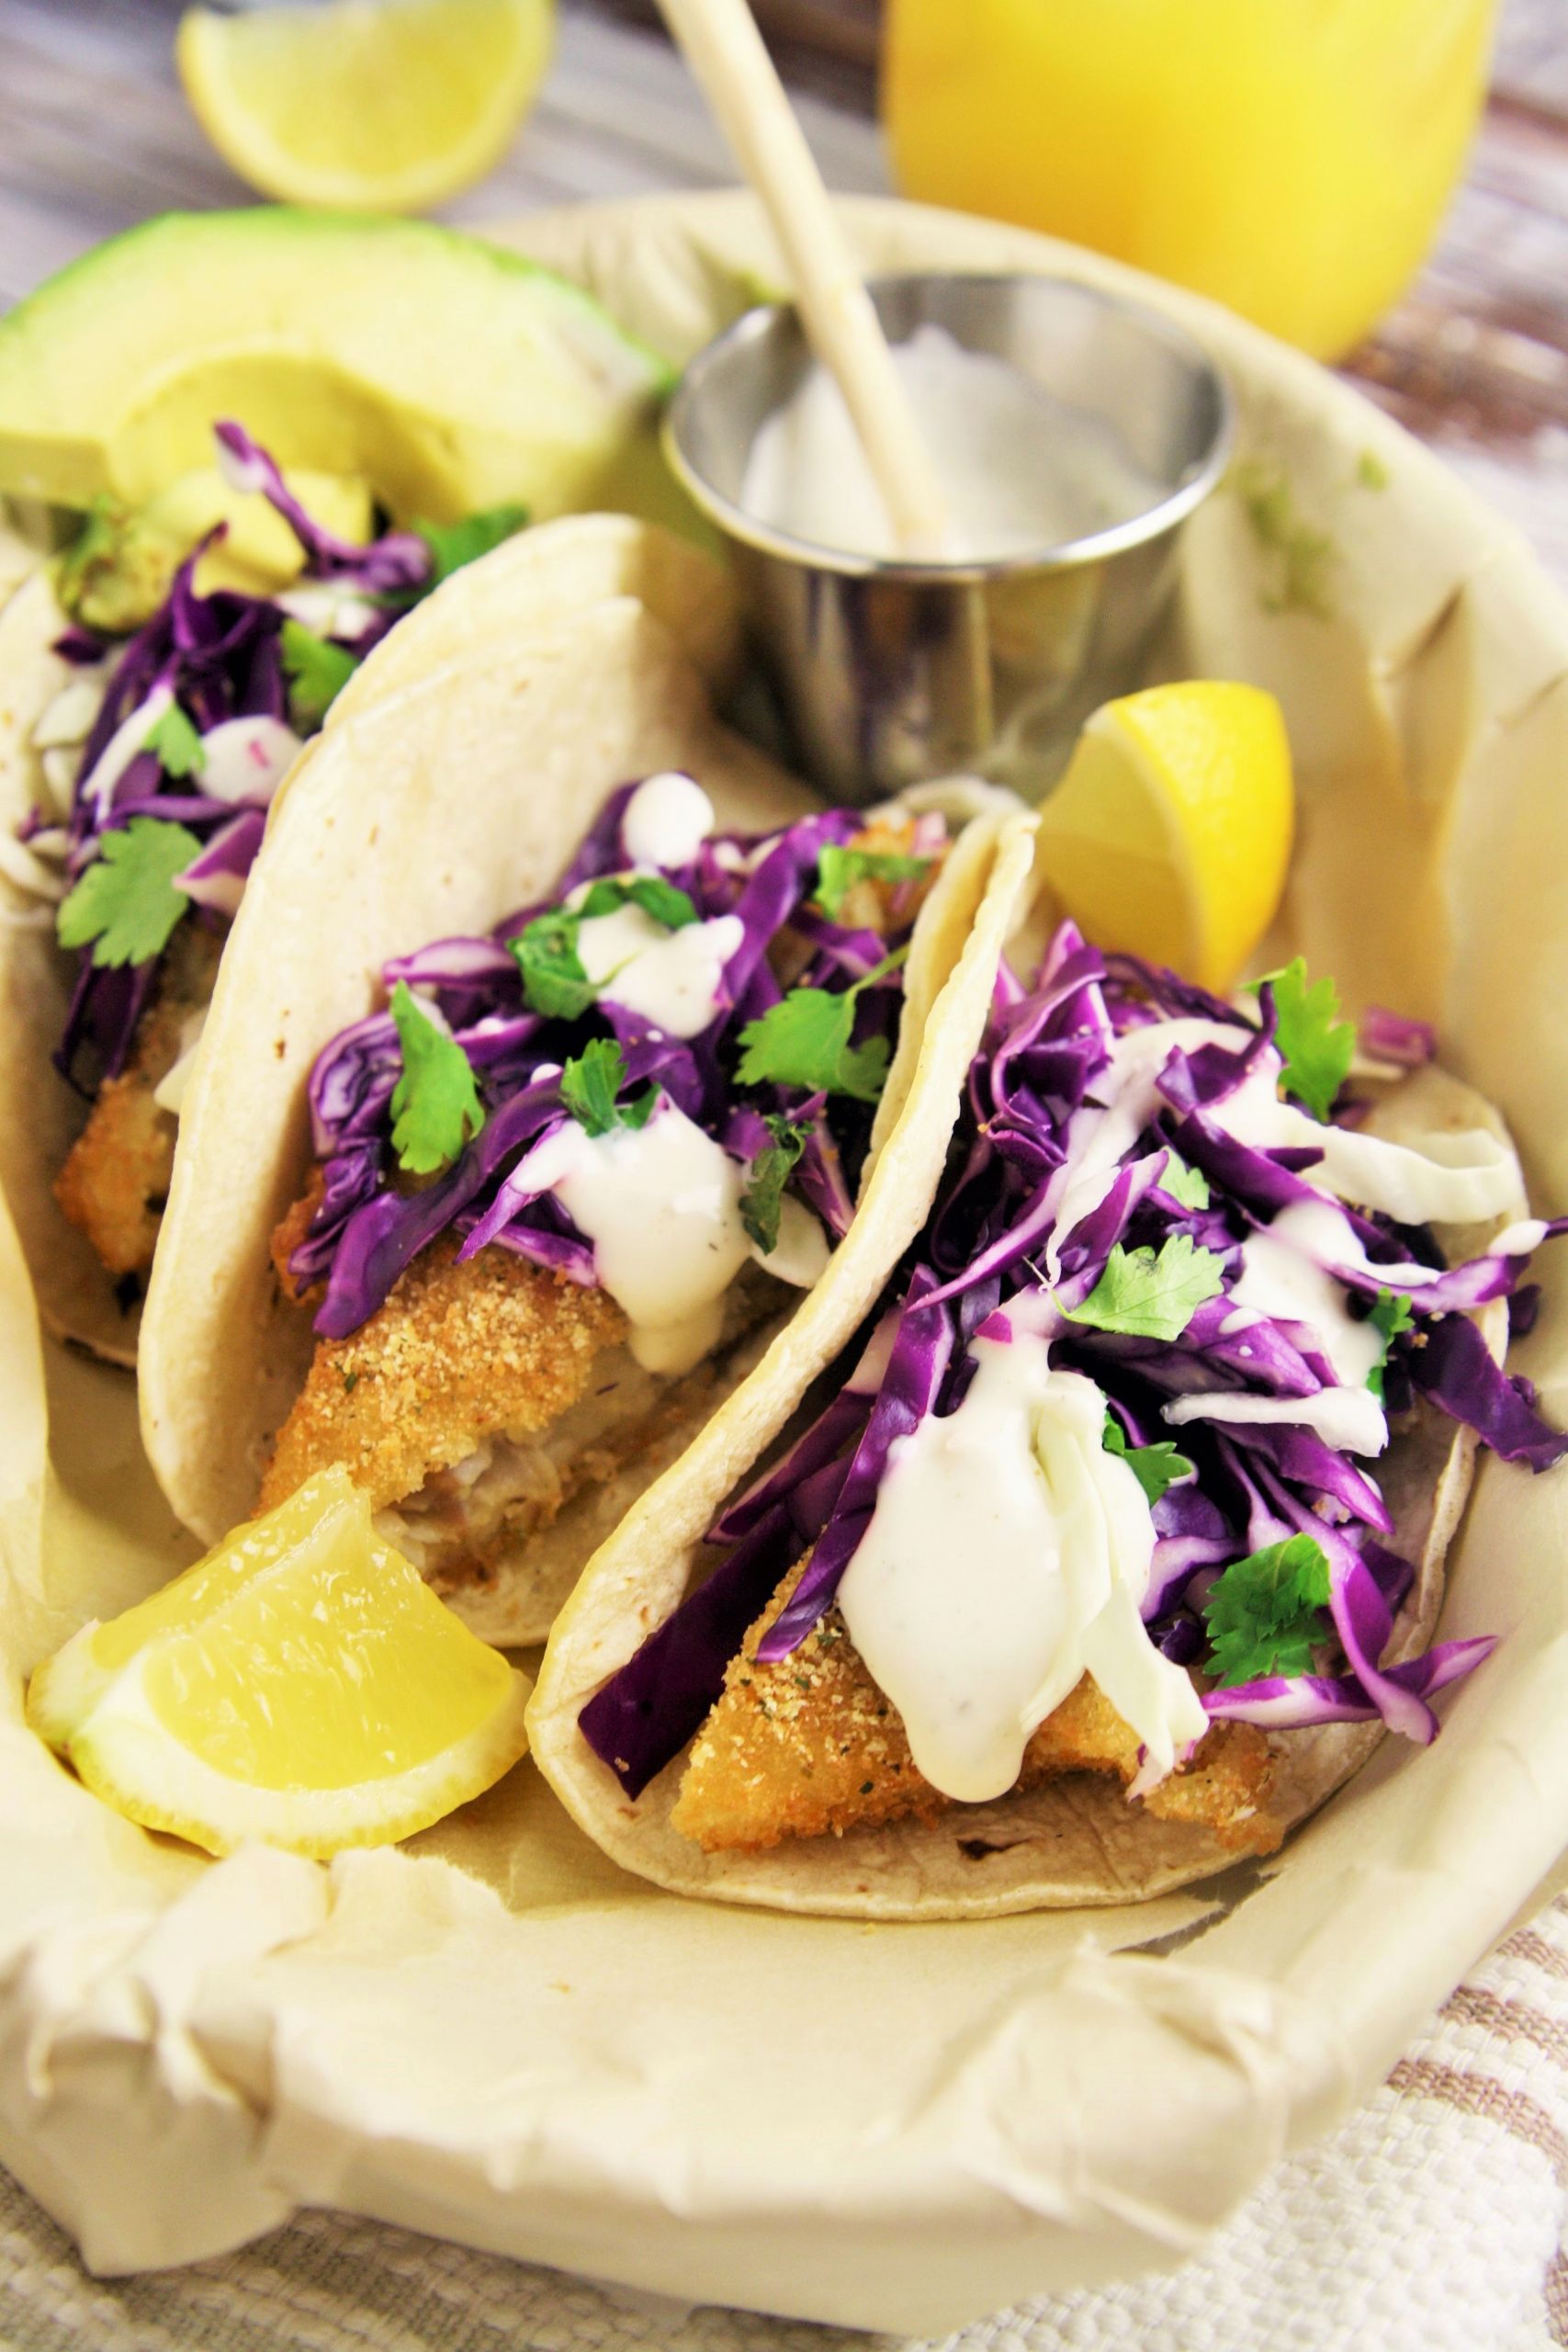 Fish Tacos with Cabbage Elegant Crispy Fish Tacos with Cabbage Slaw and Lime Crema the